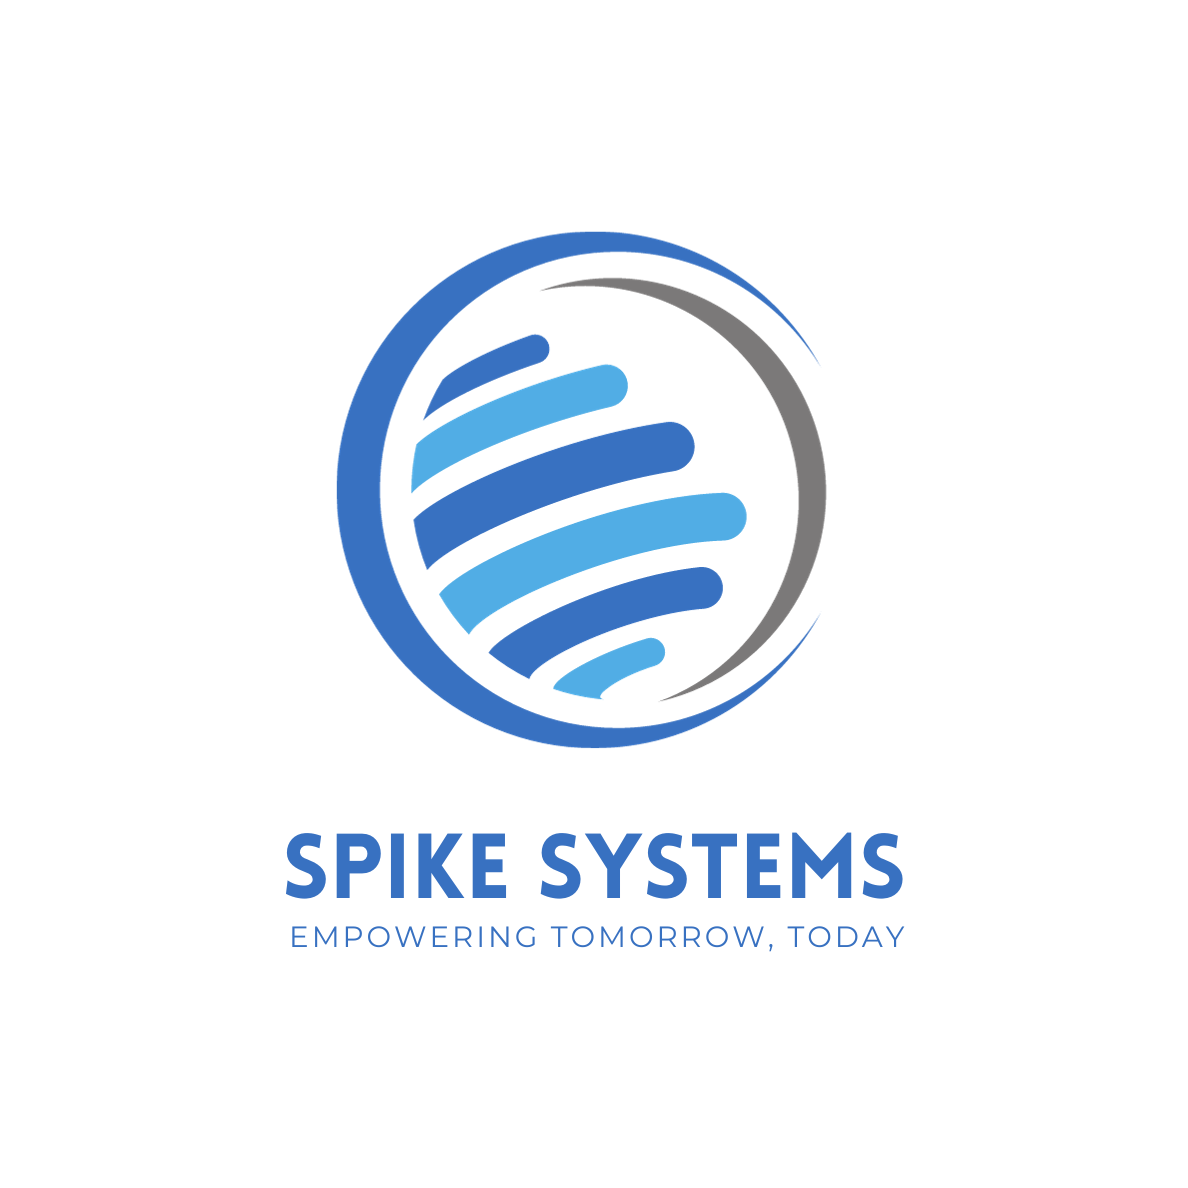 Spike systems